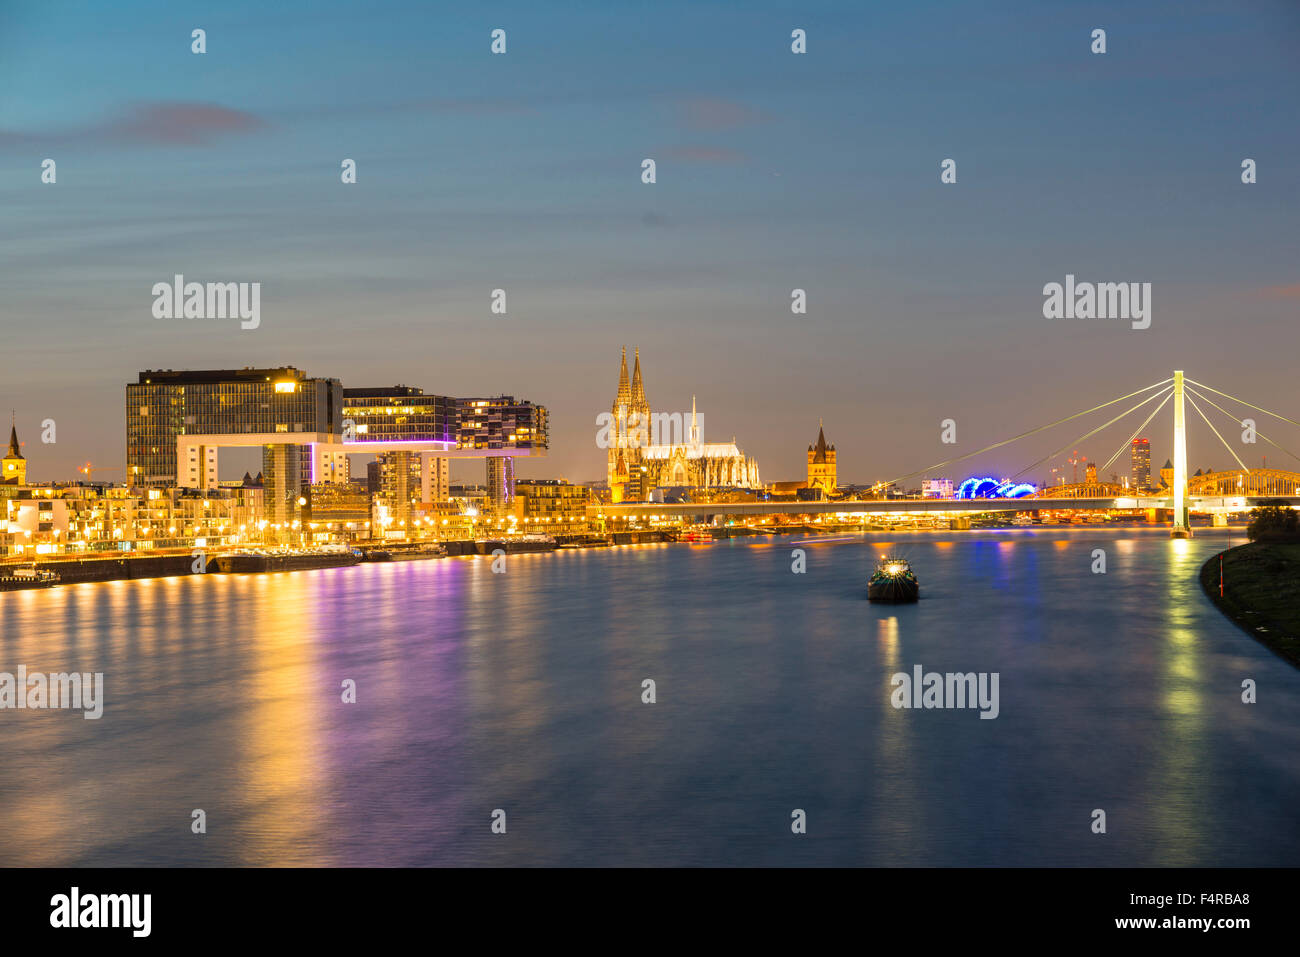 Dusk, evening sky, bishop's church, Germany, cathedral, dome, cathedral church, Europe, river, flow, blocks of flats, high-rise Stock Photo